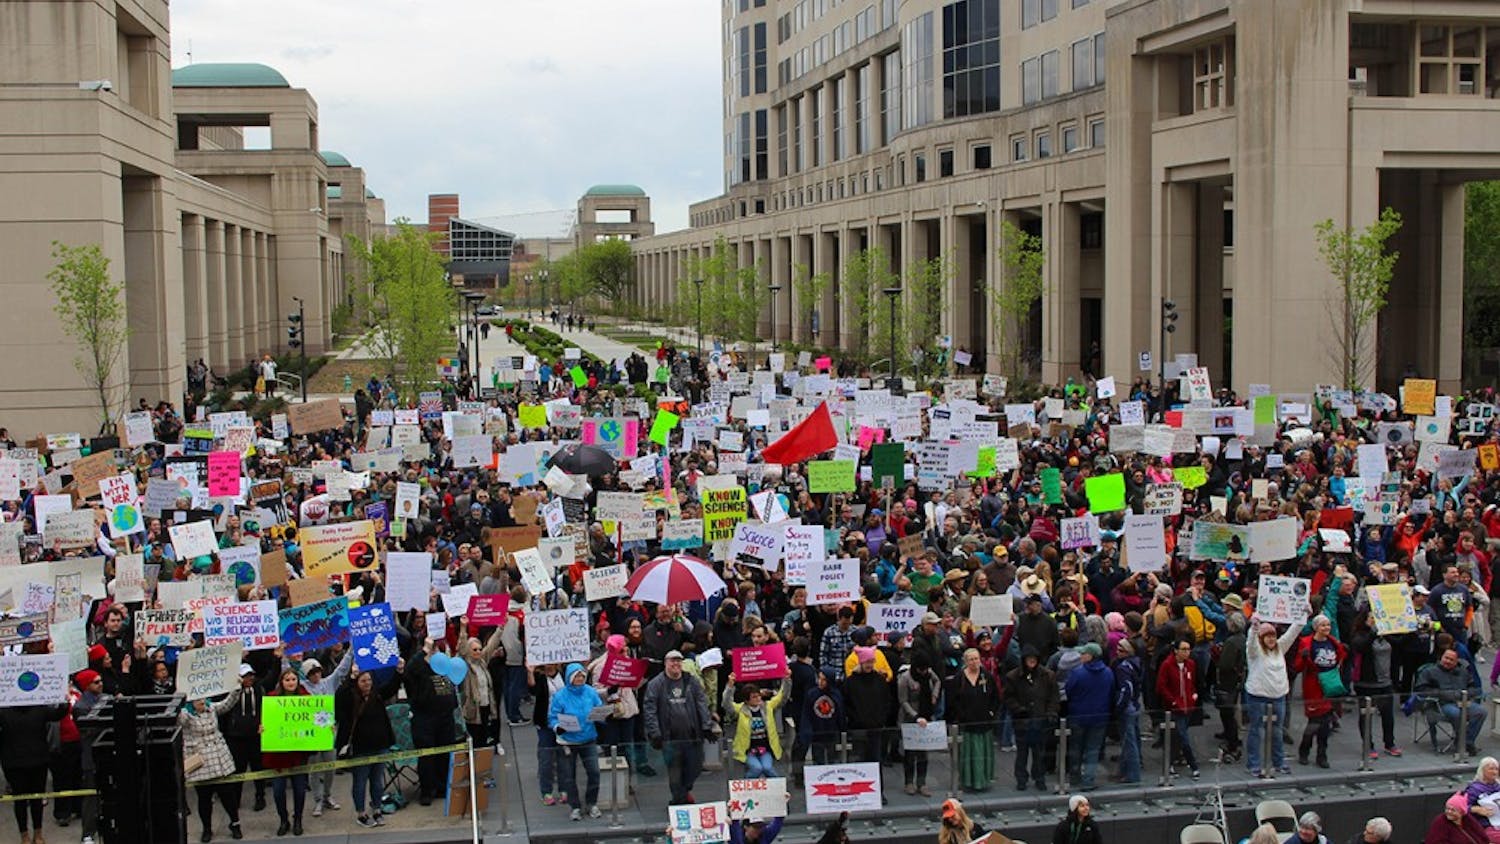 March for Science Indianapolis estimates 10,000 people attended their march on Saturday. It was one of many marches in the name of science across the country. 